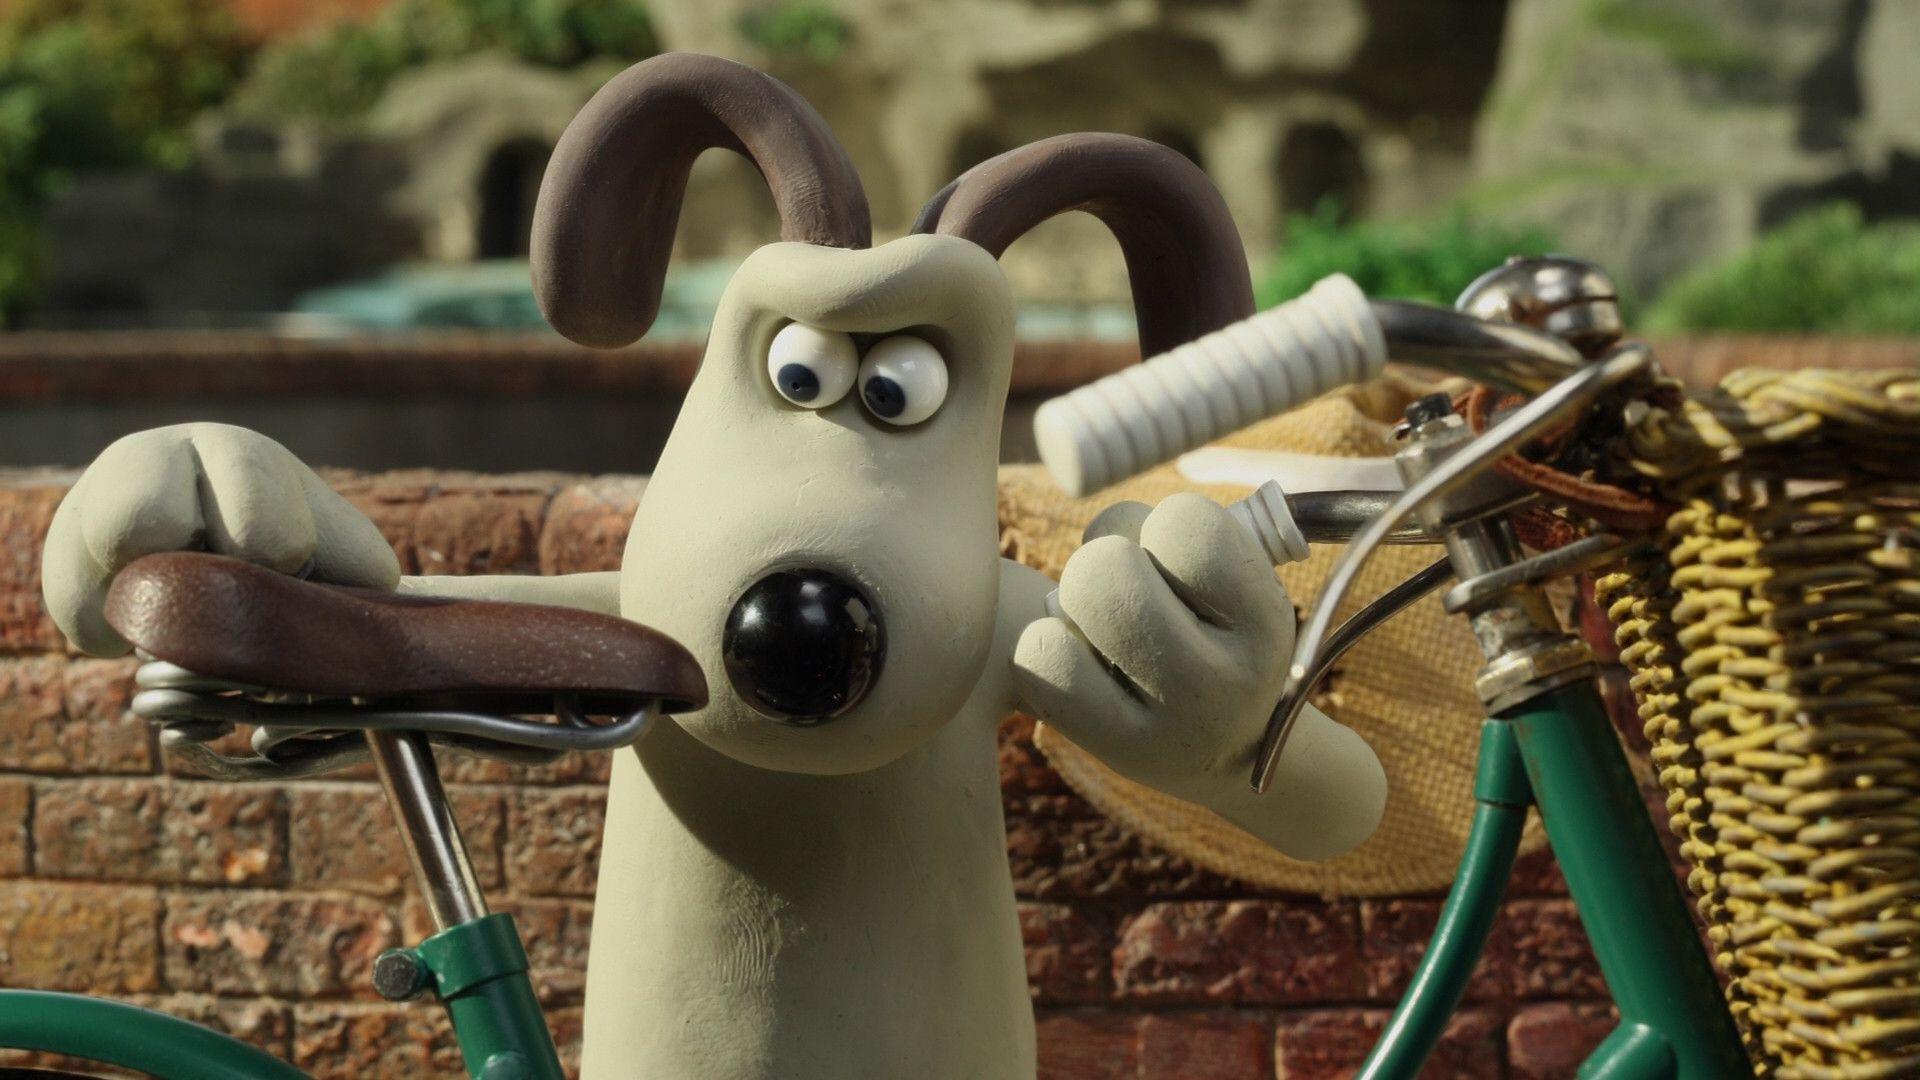 Wallace and Gromit A Matter of Loaf and Death movie rq wallpaper